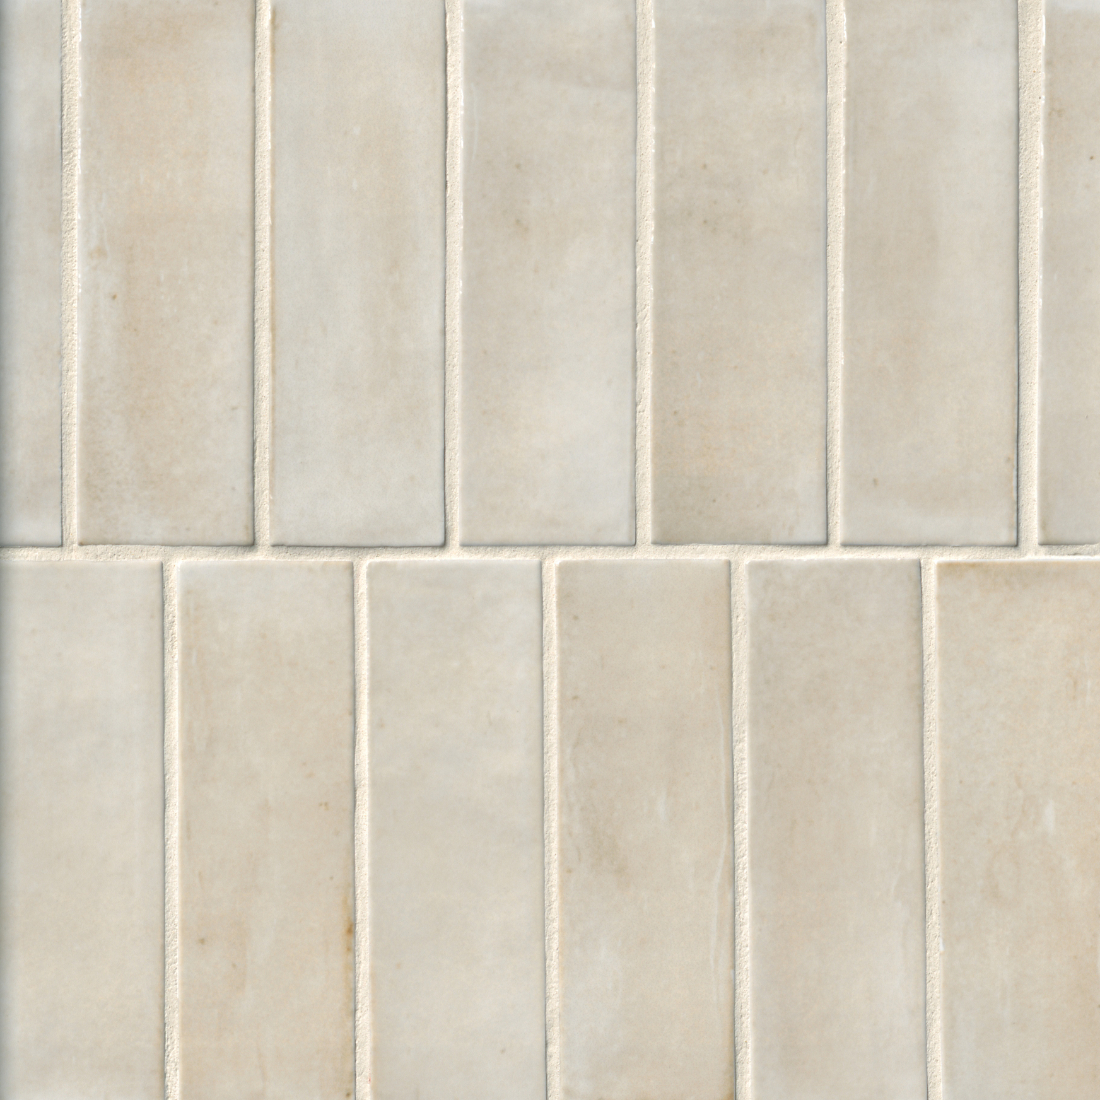 Coco Canvas Glossy Porcelain Wall Tile - 2 x 6 in. - The Tile Shop